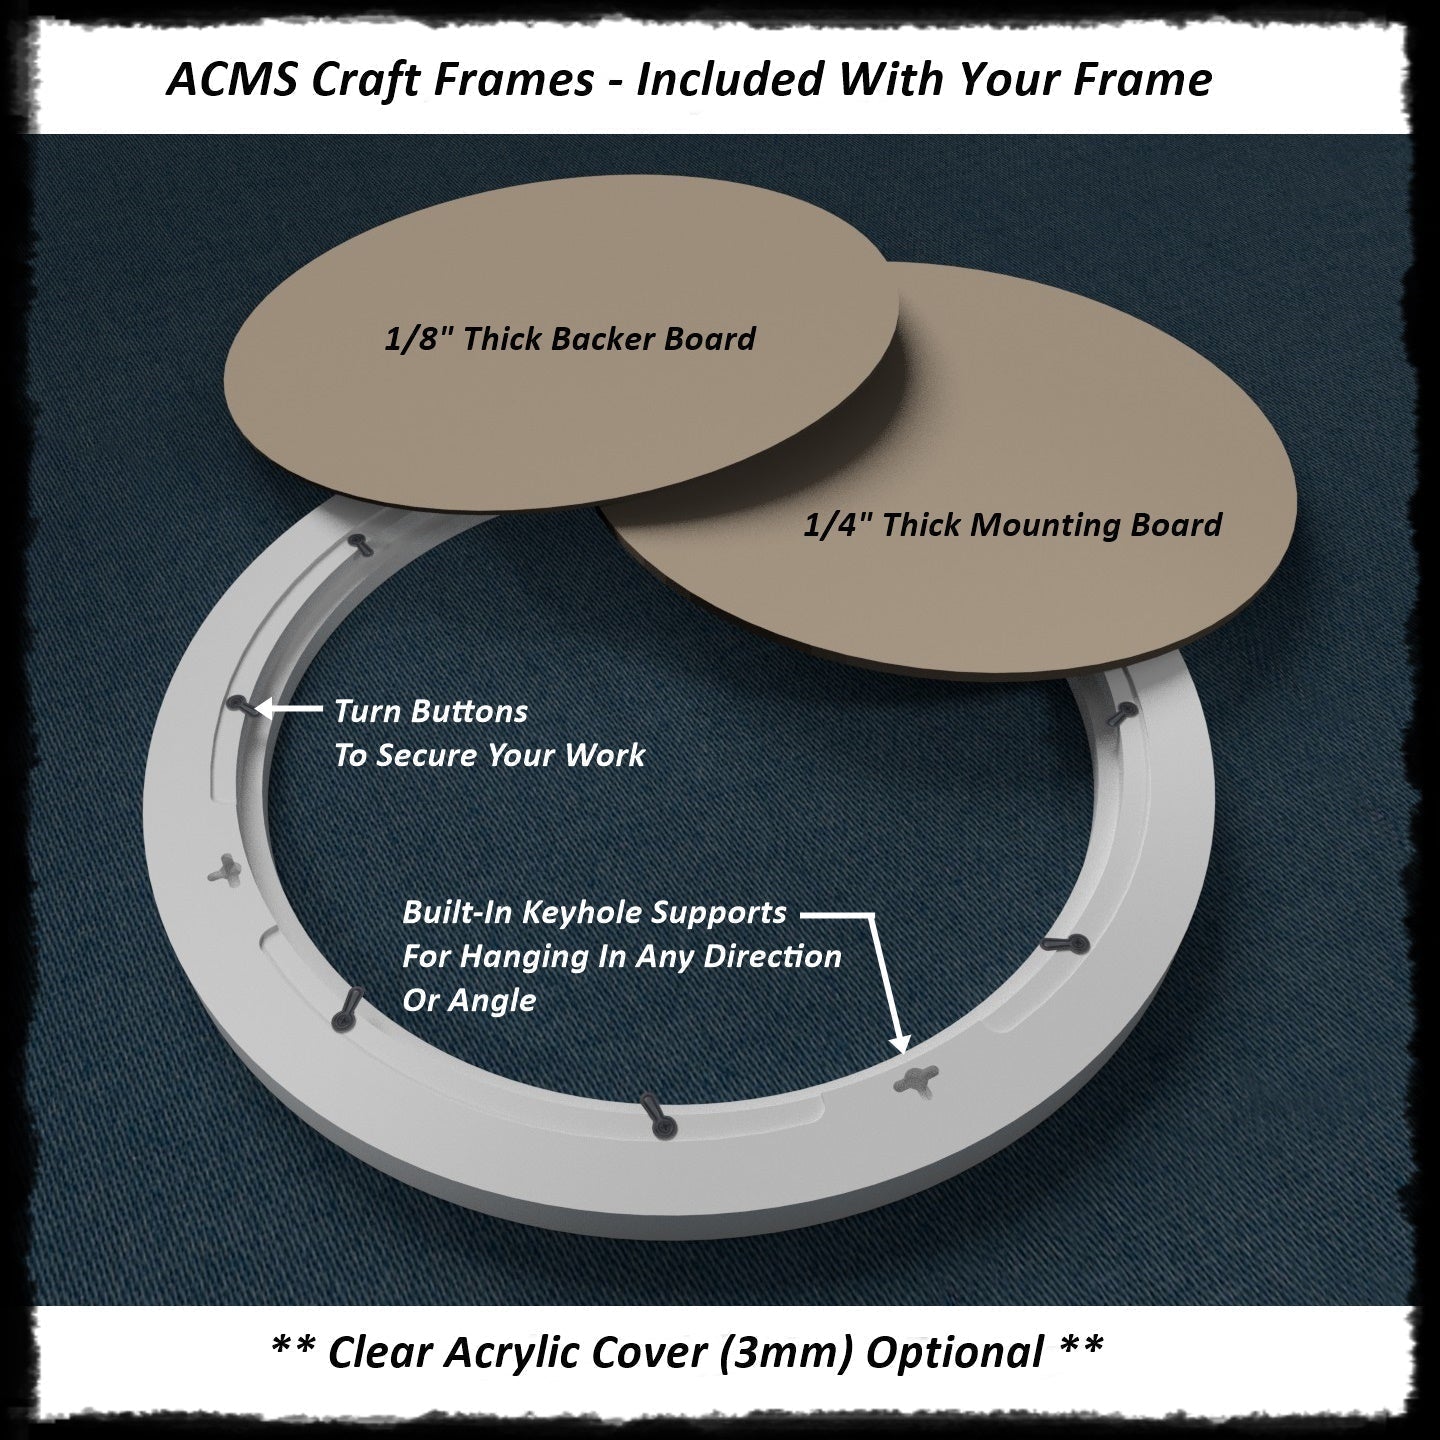 Oval Craft Frame - HUMP COVE Profile - 1 1/2" Frame Width - 1" Thick